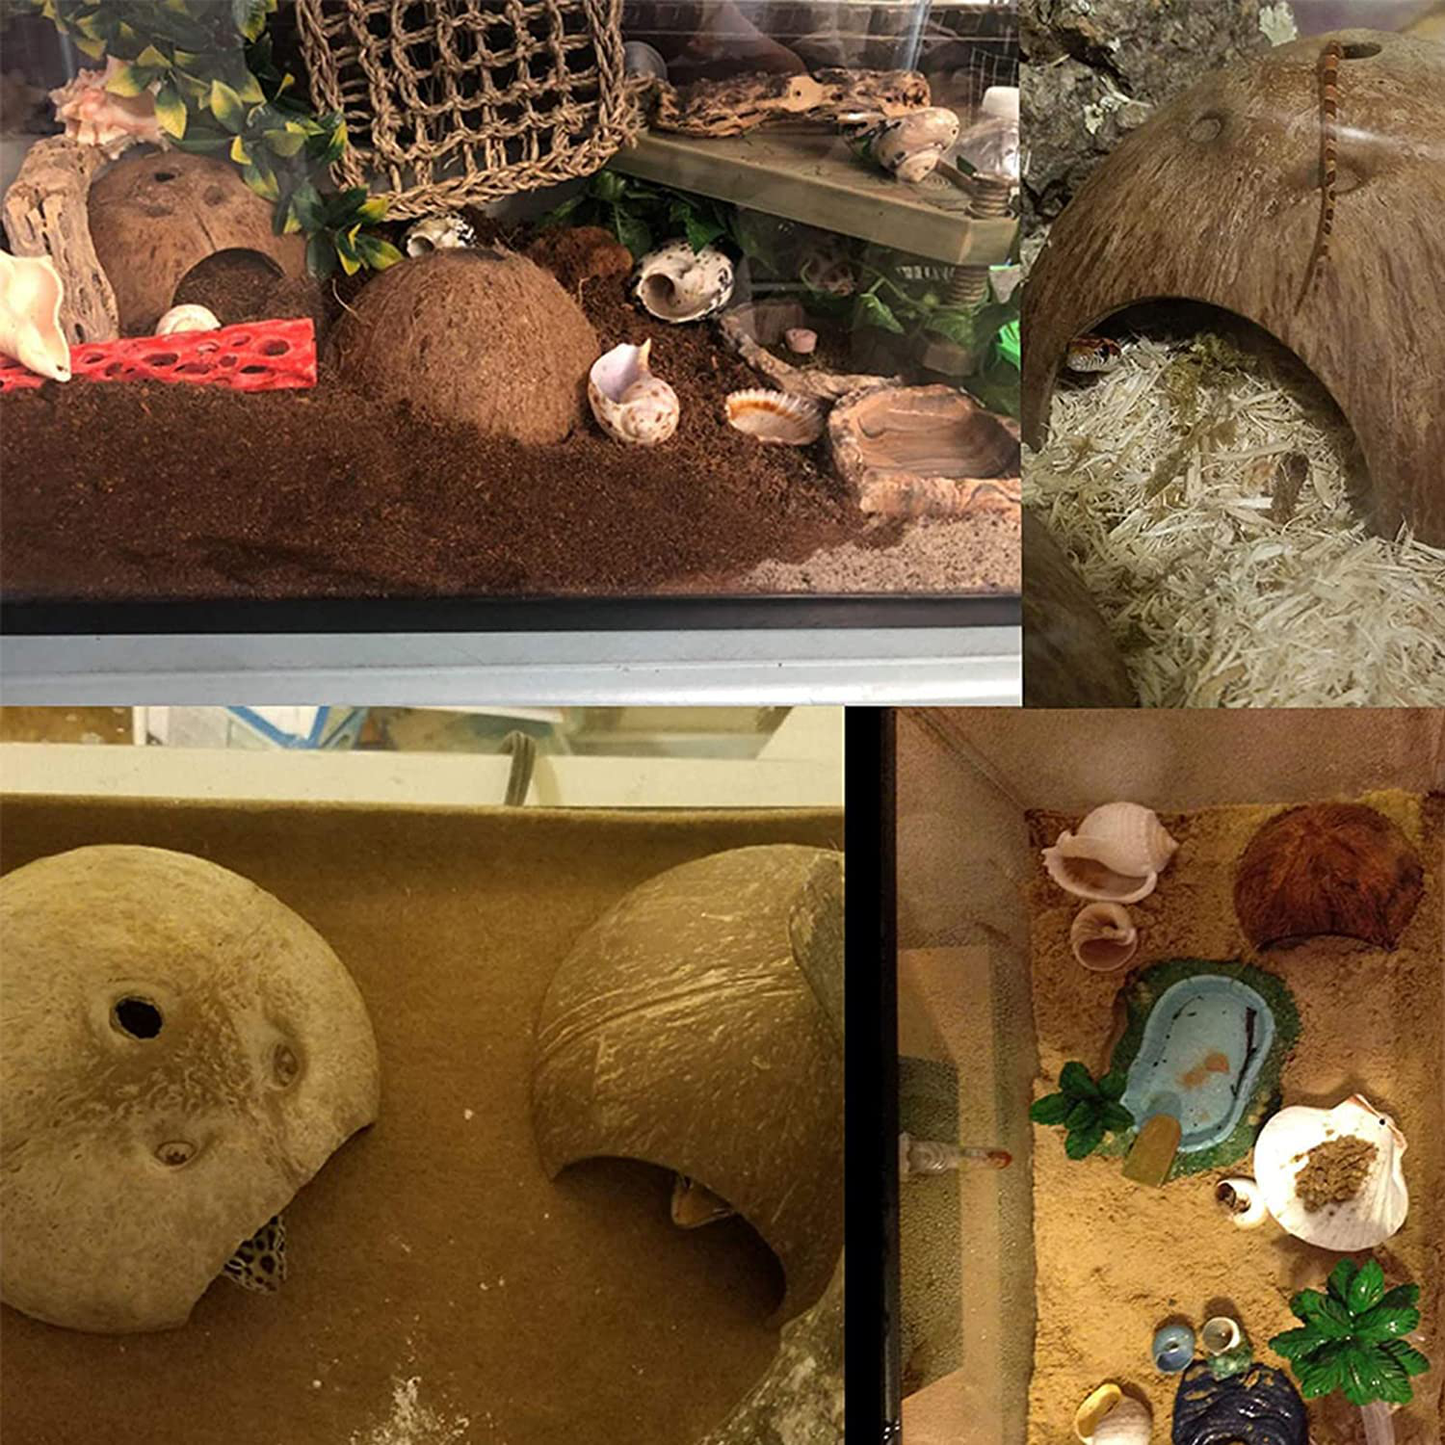 HERCOCCI Leopard Gecko Tank Accessories, Coconut Shell Hideout Cave Reptile Climbing Vine Habitat Decor with Hanging Reptile Plants for Chameleon Lizard Snake Hermit Crab Animals & Pet Supplies > Pet Supplies > Reptile & Amphibian Supplies > Reptile & Amphibian Habitats HERCOCCI   